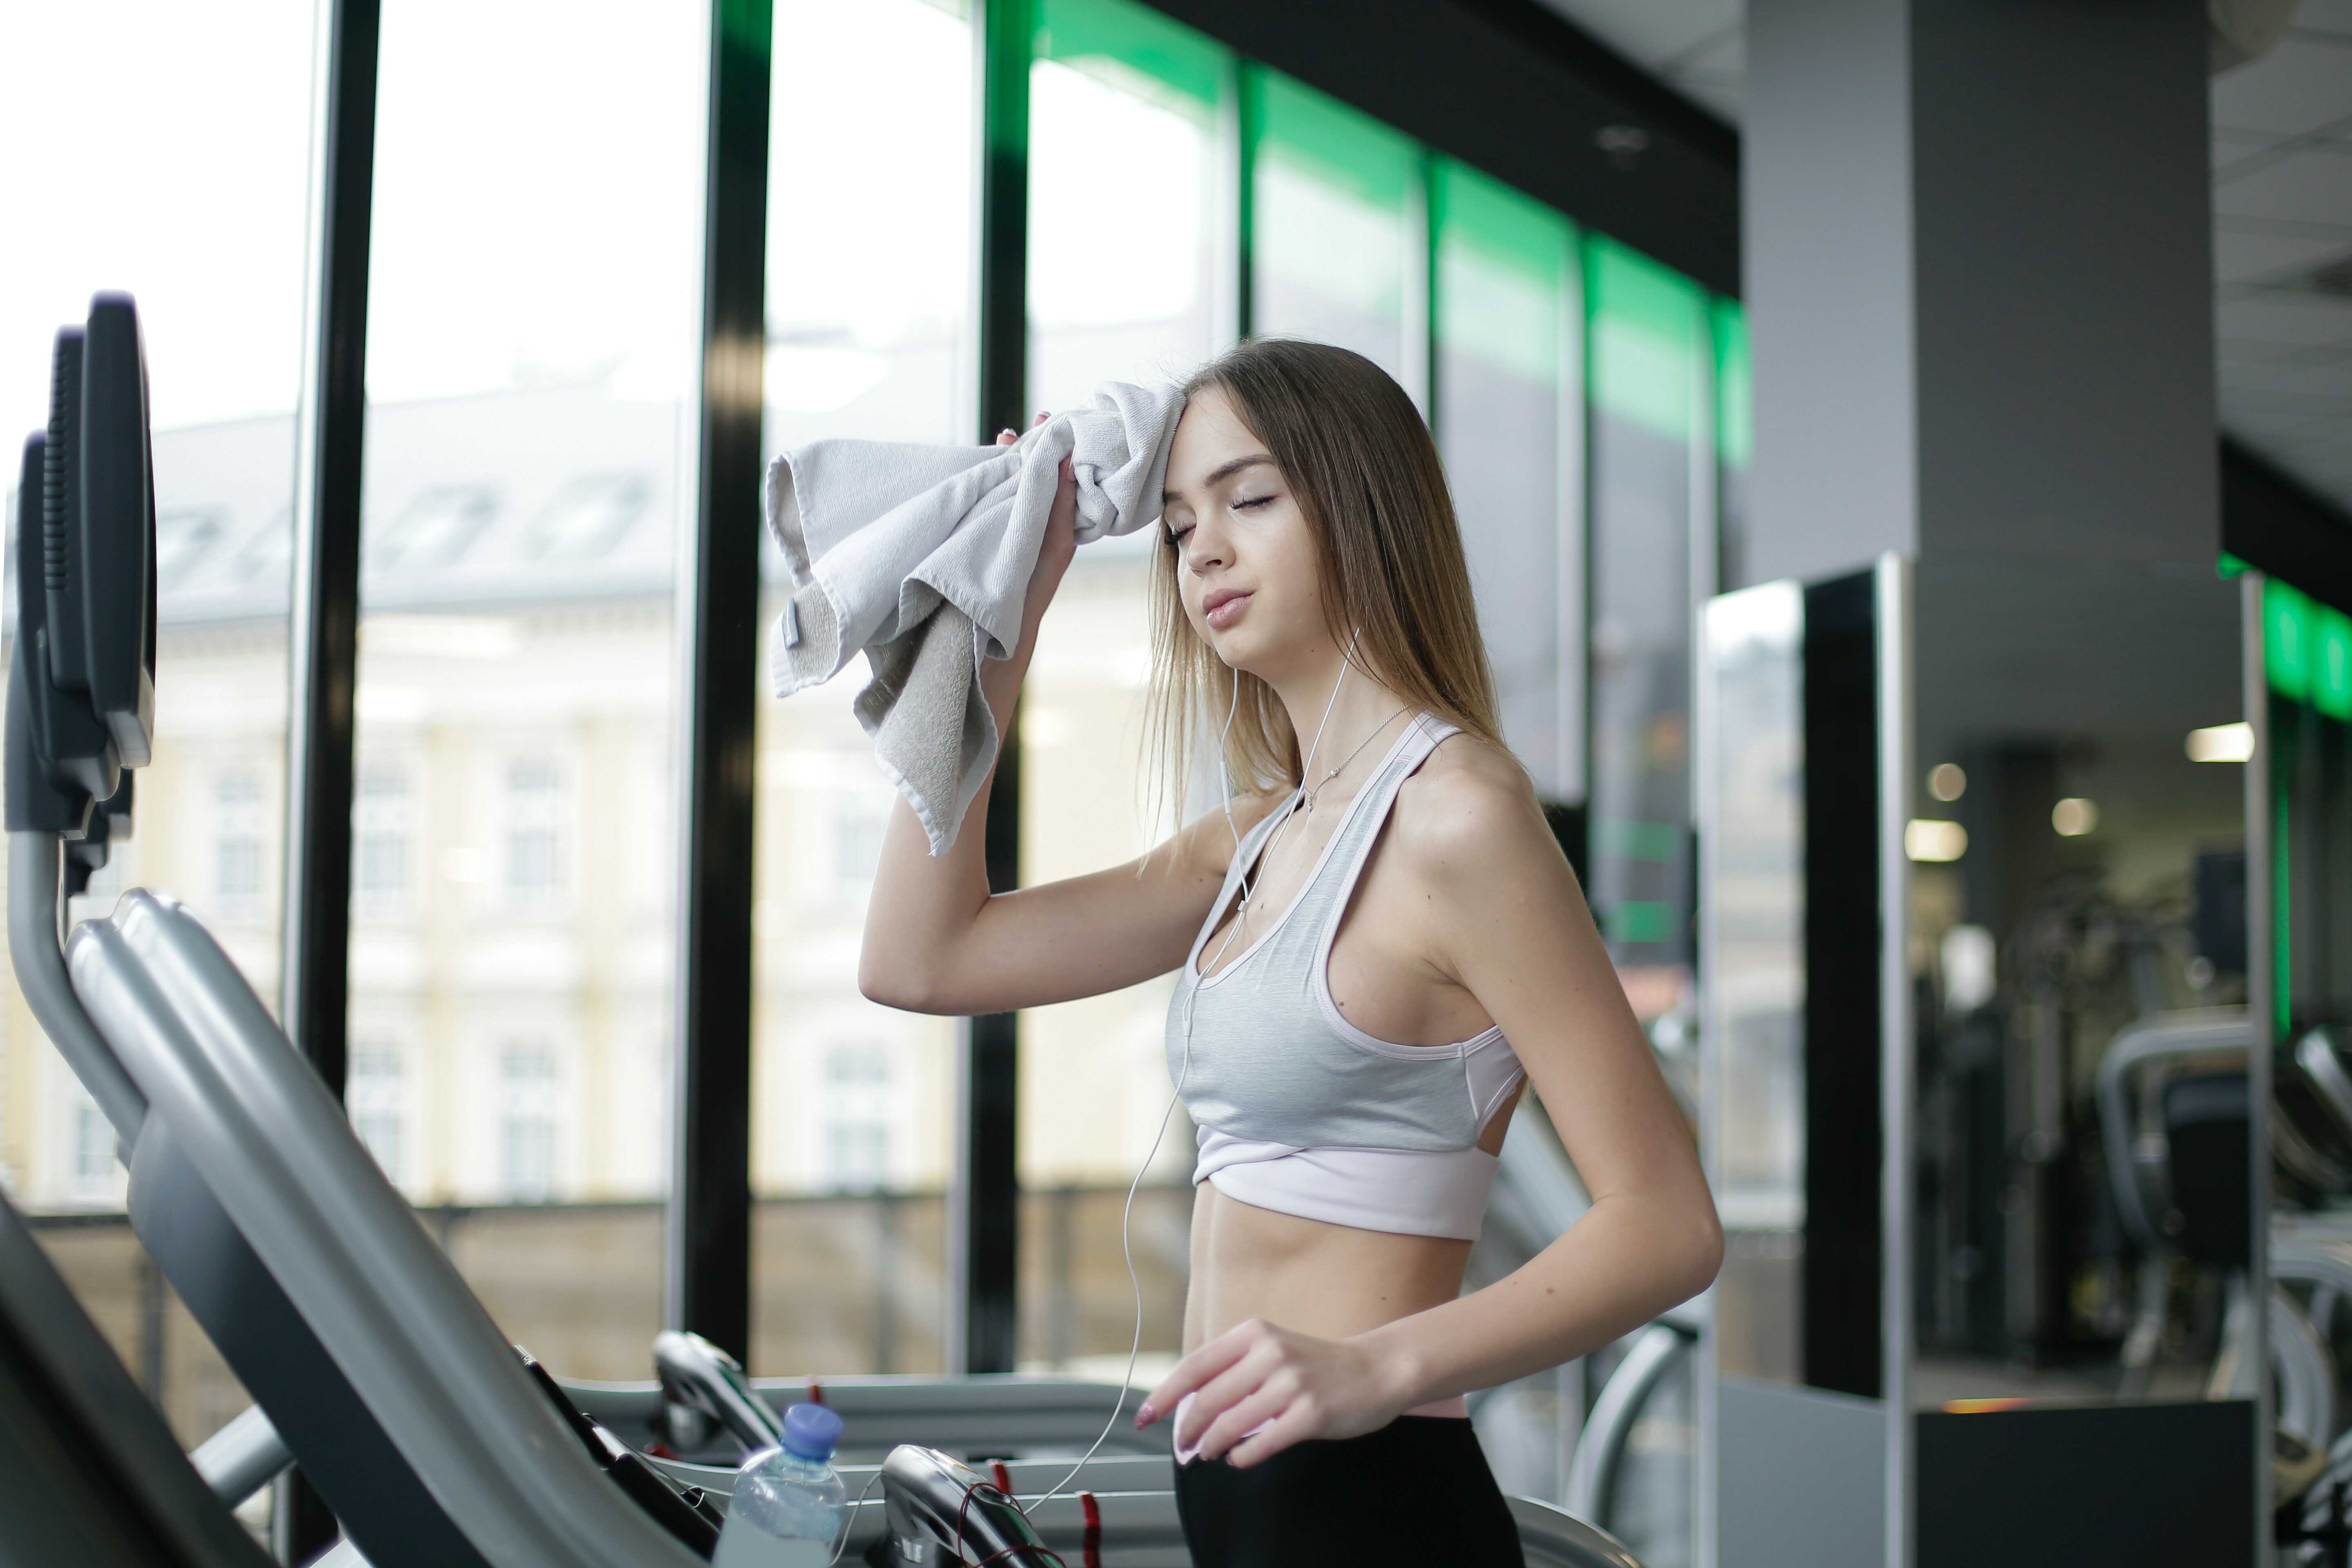 a woman in the gym swapping her sweat